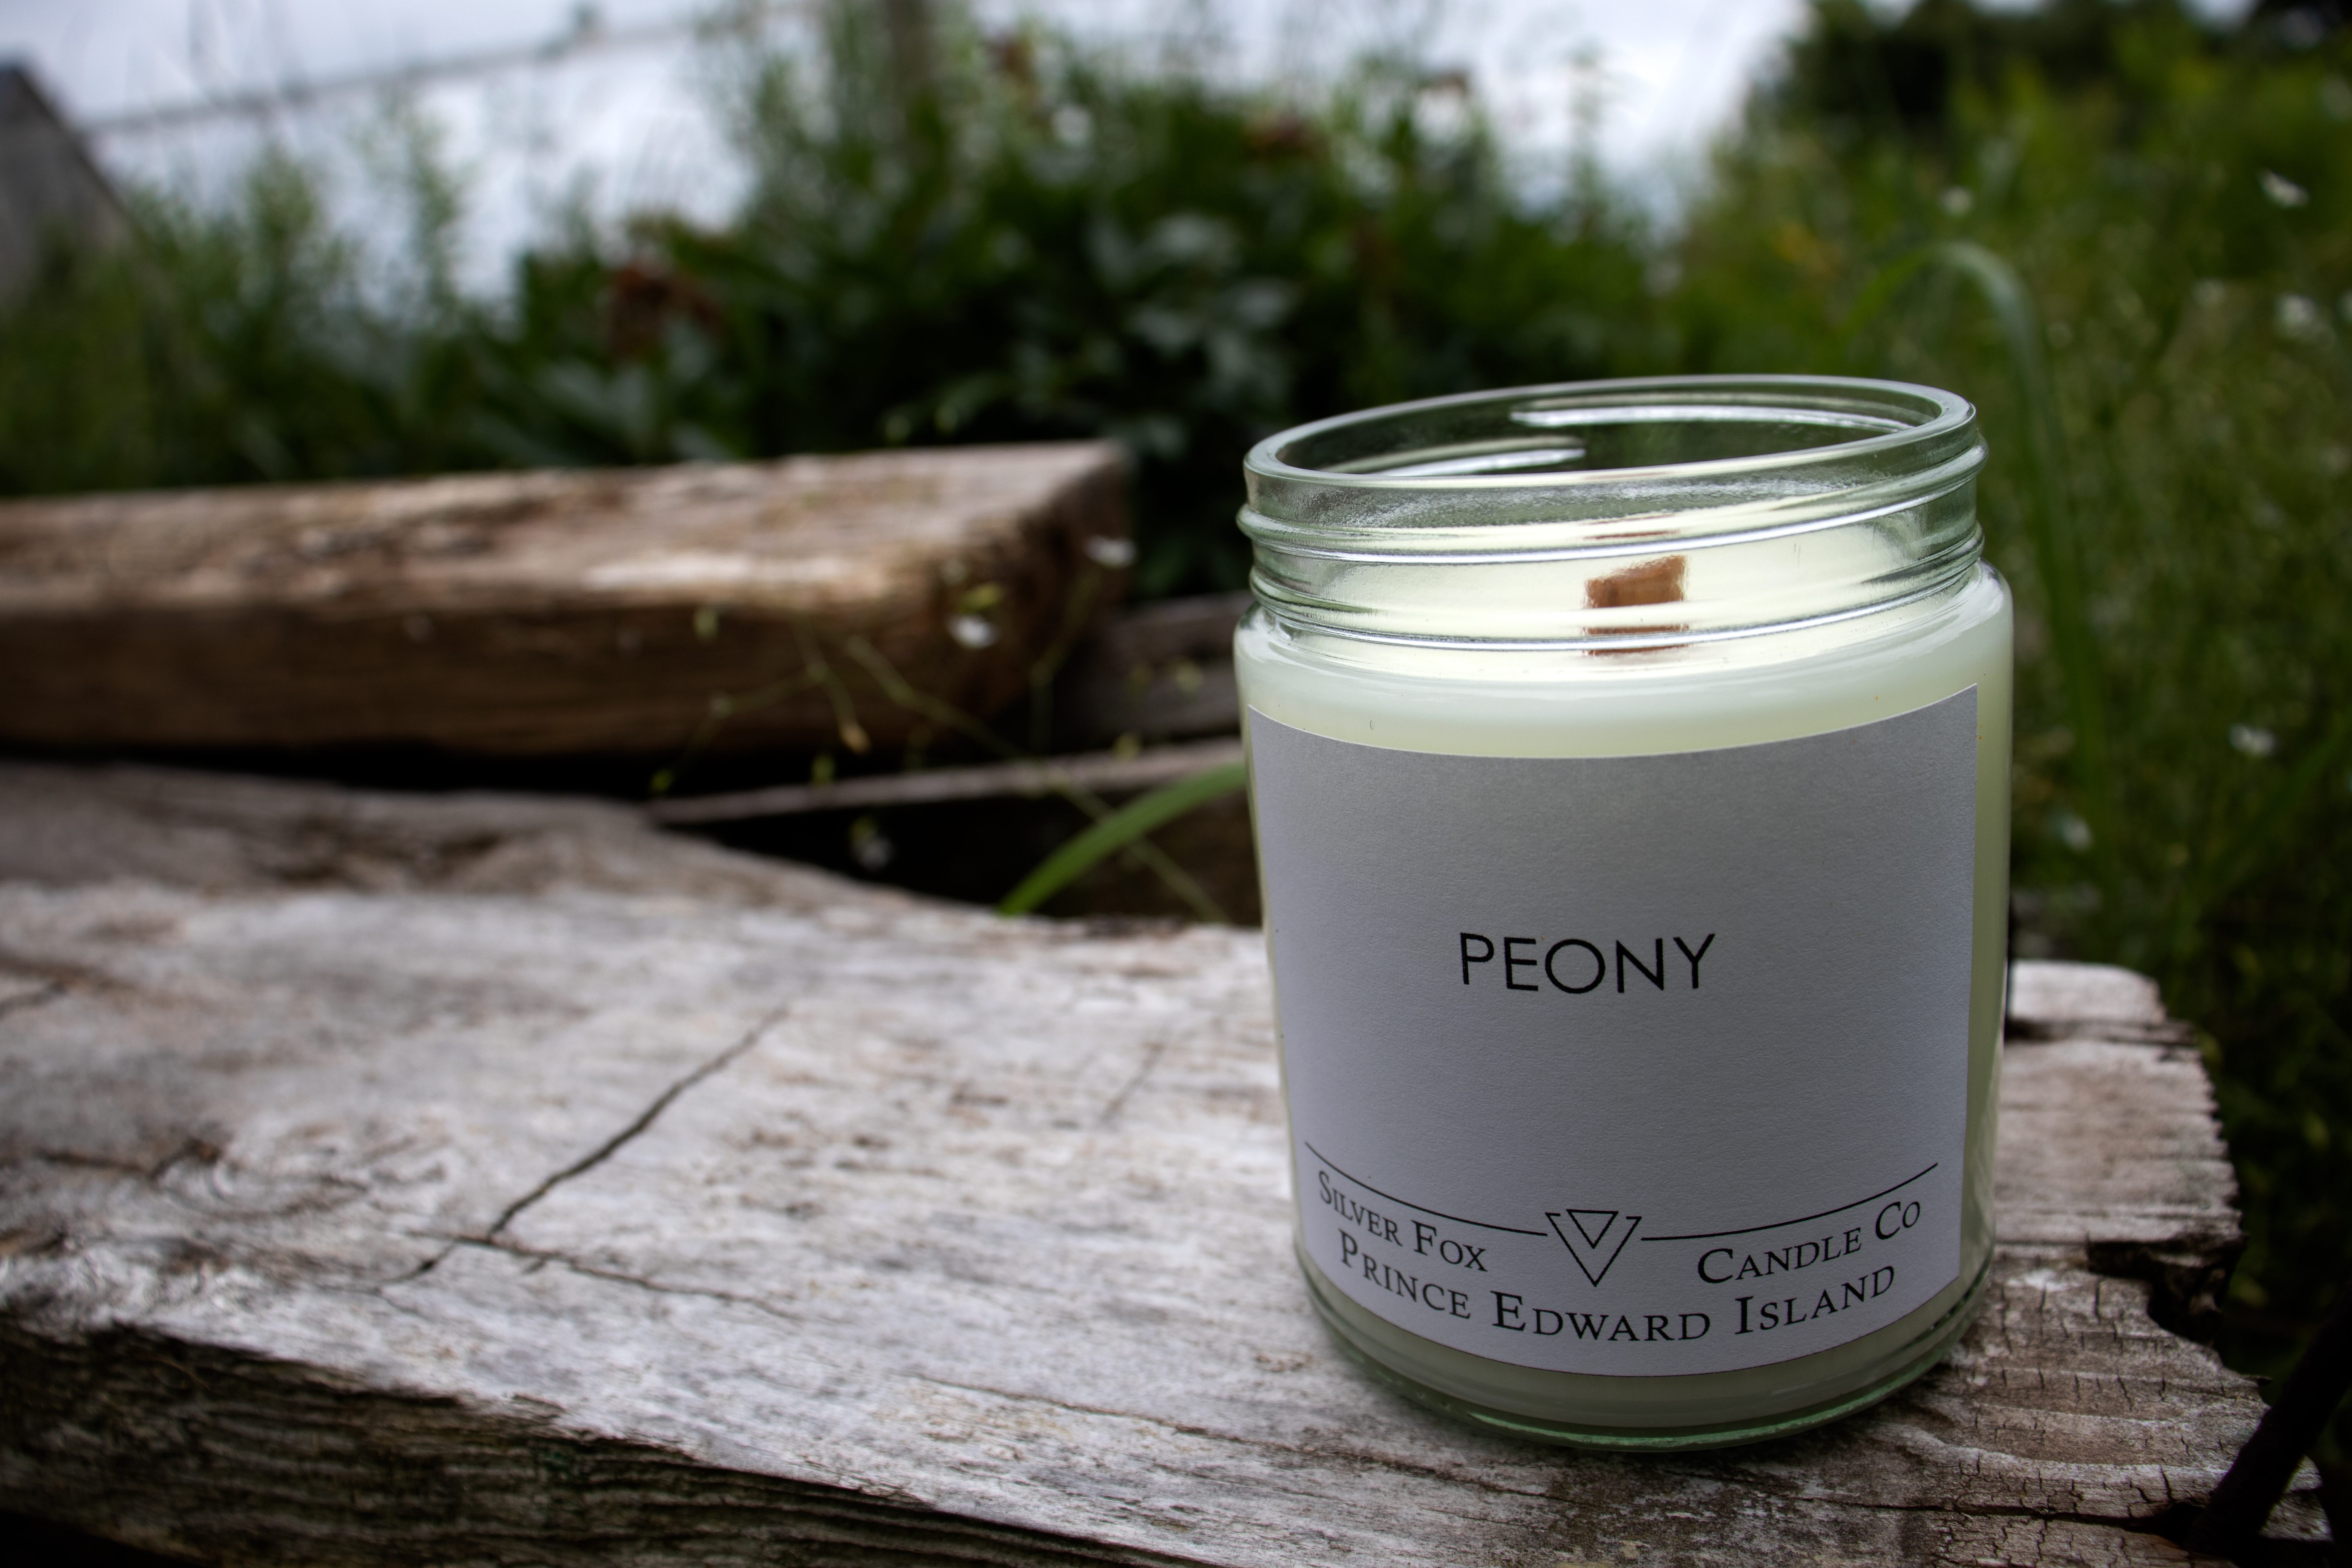 Peony Scented Soy Wax Candle from the Silver Fox Candle Company - Peony Bush